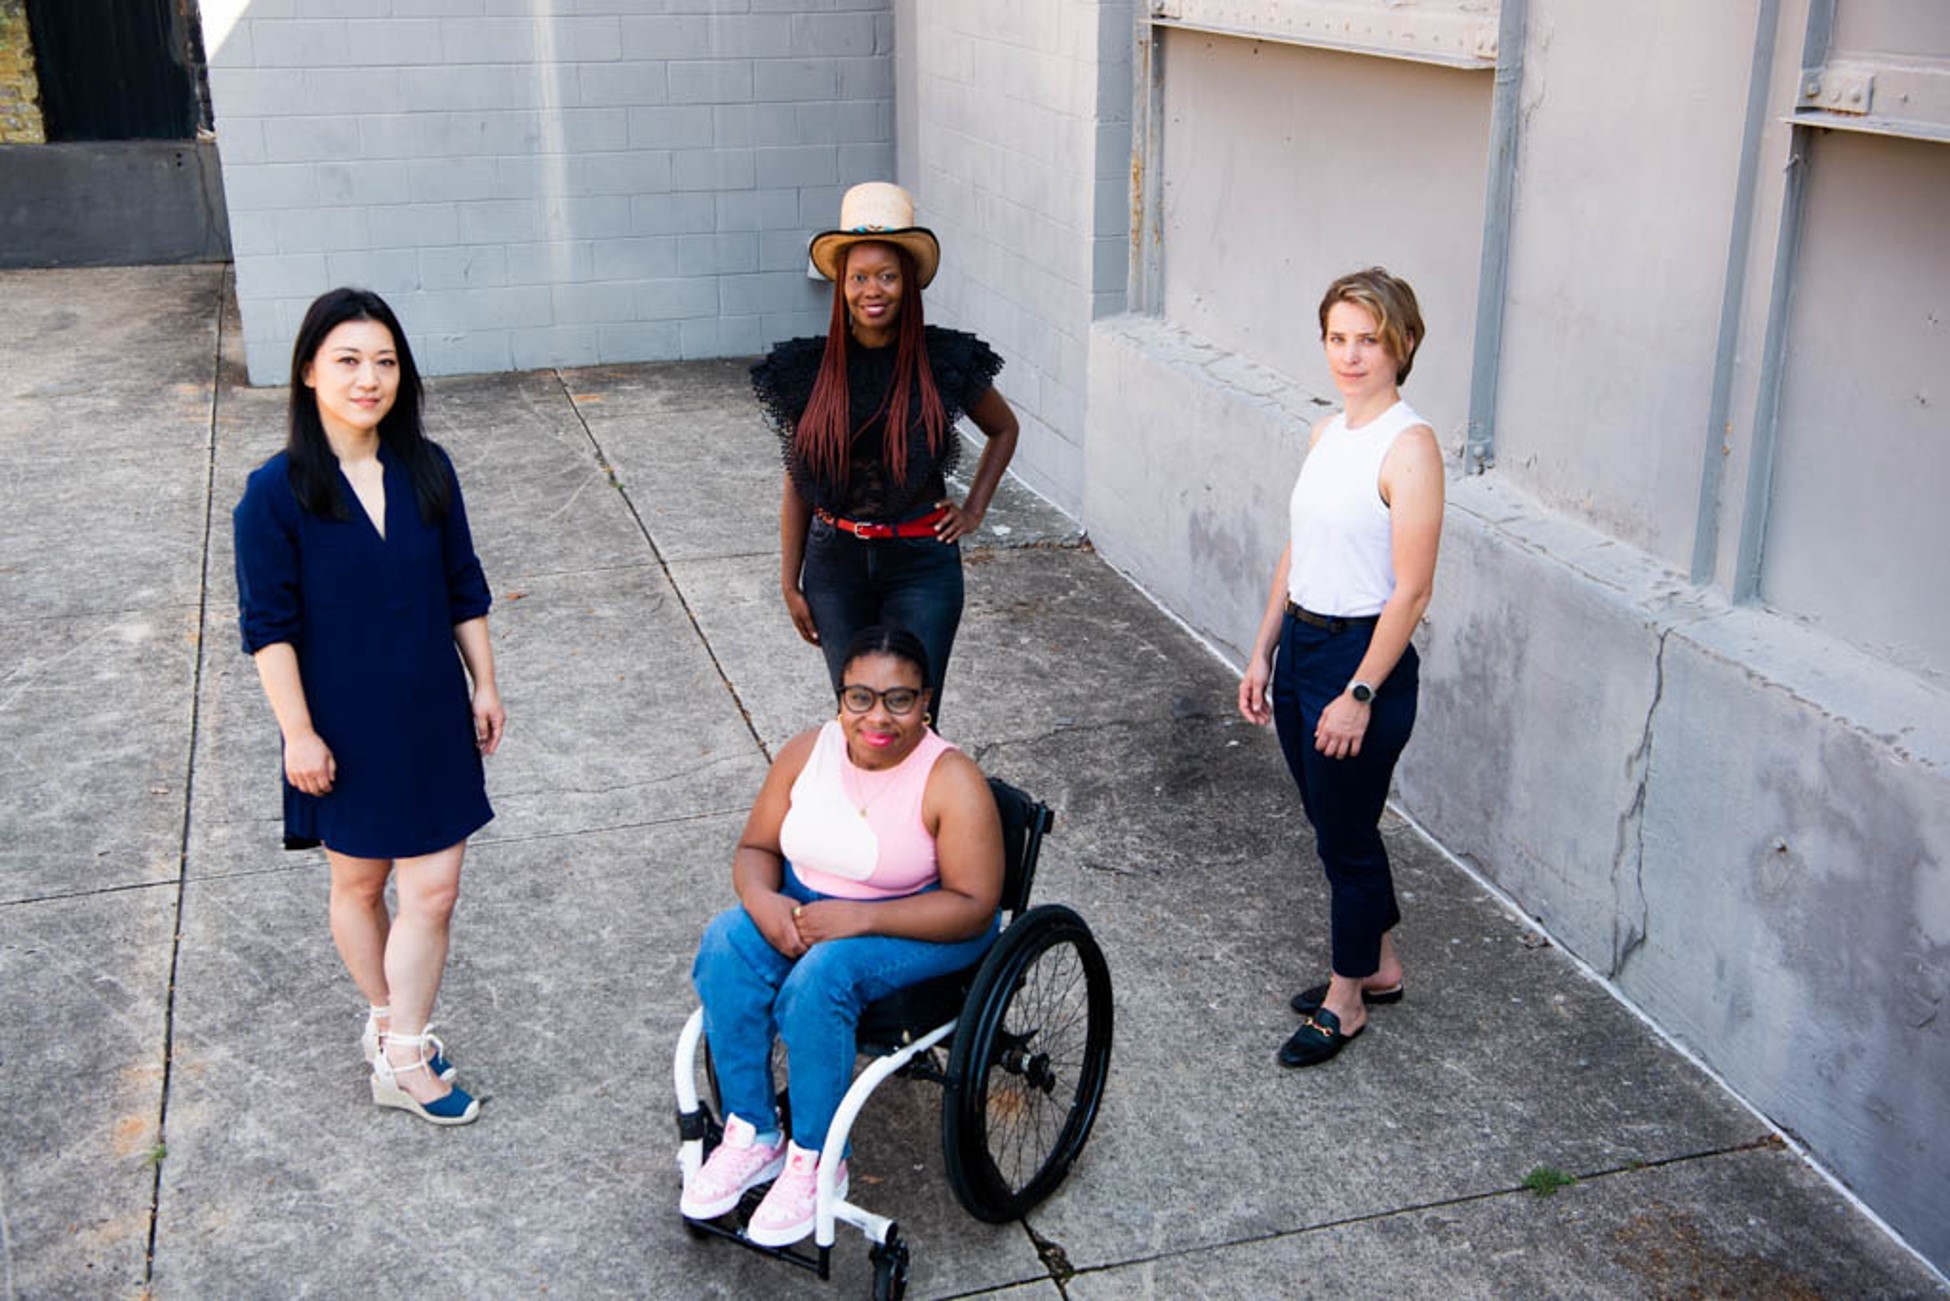 From left to right: Namwon Choi, Shanequa Gay, Marianna Dixon Williams and Victoria Dugger (center). Not pictured: Anila Agha. Image courtesy of Sierra King/@sierrachasity